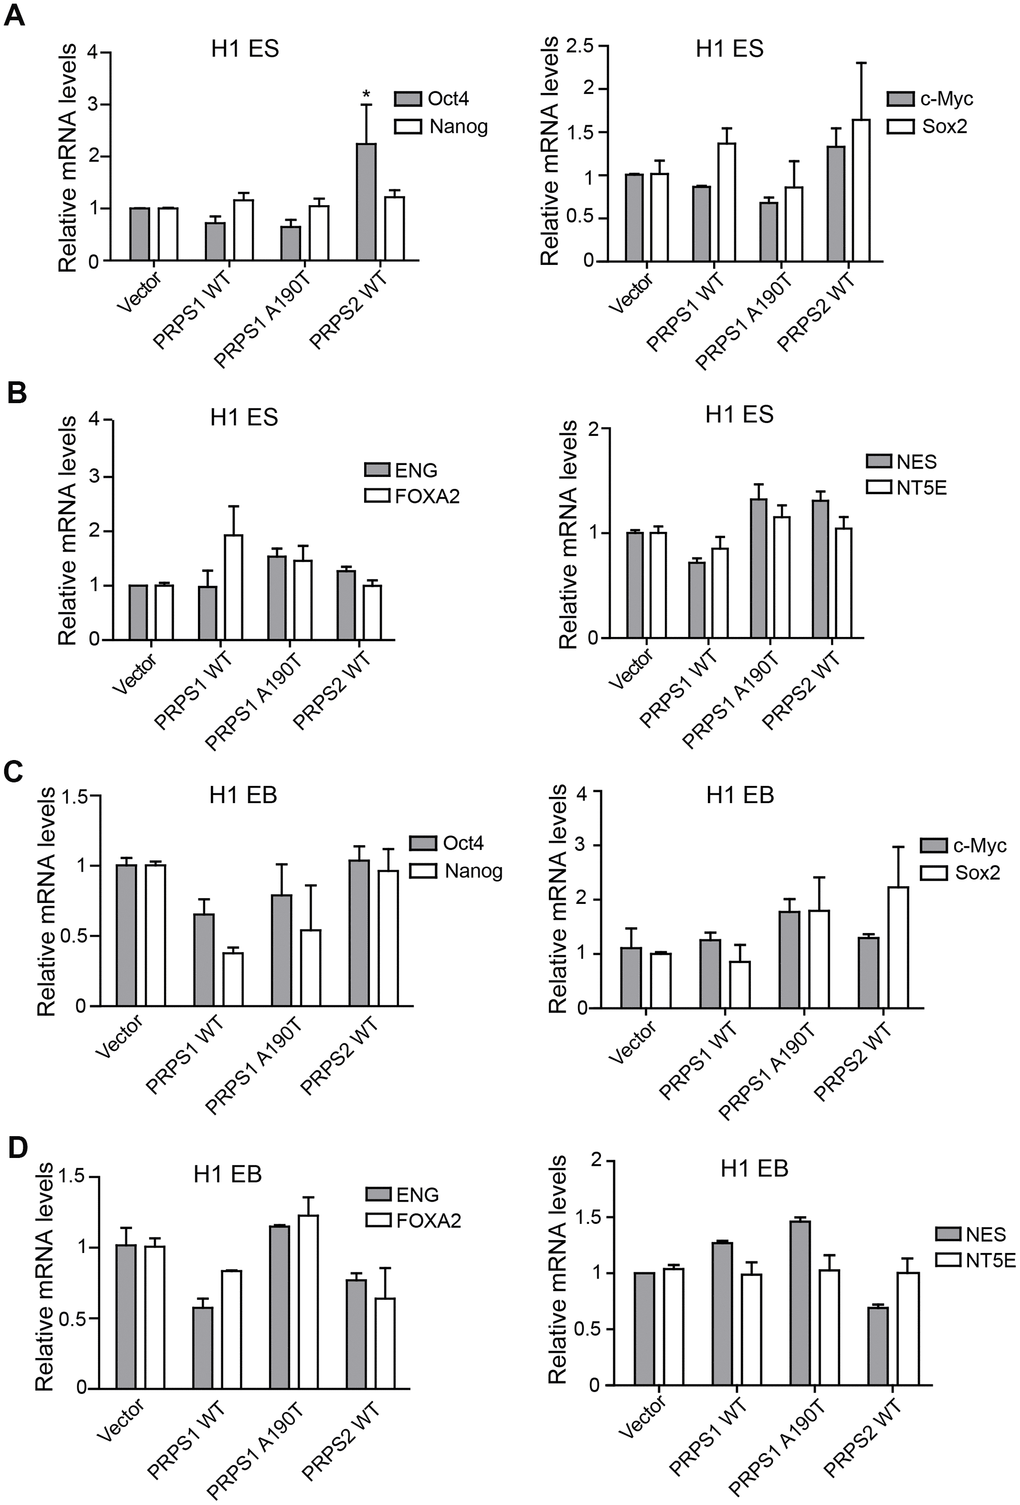 PRPS1/PRPS2 overexpression has no effect on PSCs stemness. (A, C) qRT-PCR analysis of expression levels of pluripotency genes, Oct4, Nanog, c-Myc, and Sox2, in PSCs (CB iPSCs) (A) and EB (embryoid bodies) (C). *PB, D) qRT-PCR analysis of expression levels of triploblastic genes, ENG, FOXA2, NES, and NT5E, in PSCs (B) and EB (embryoid bodies) (D) Data are representative of three independent experiments with similar results.